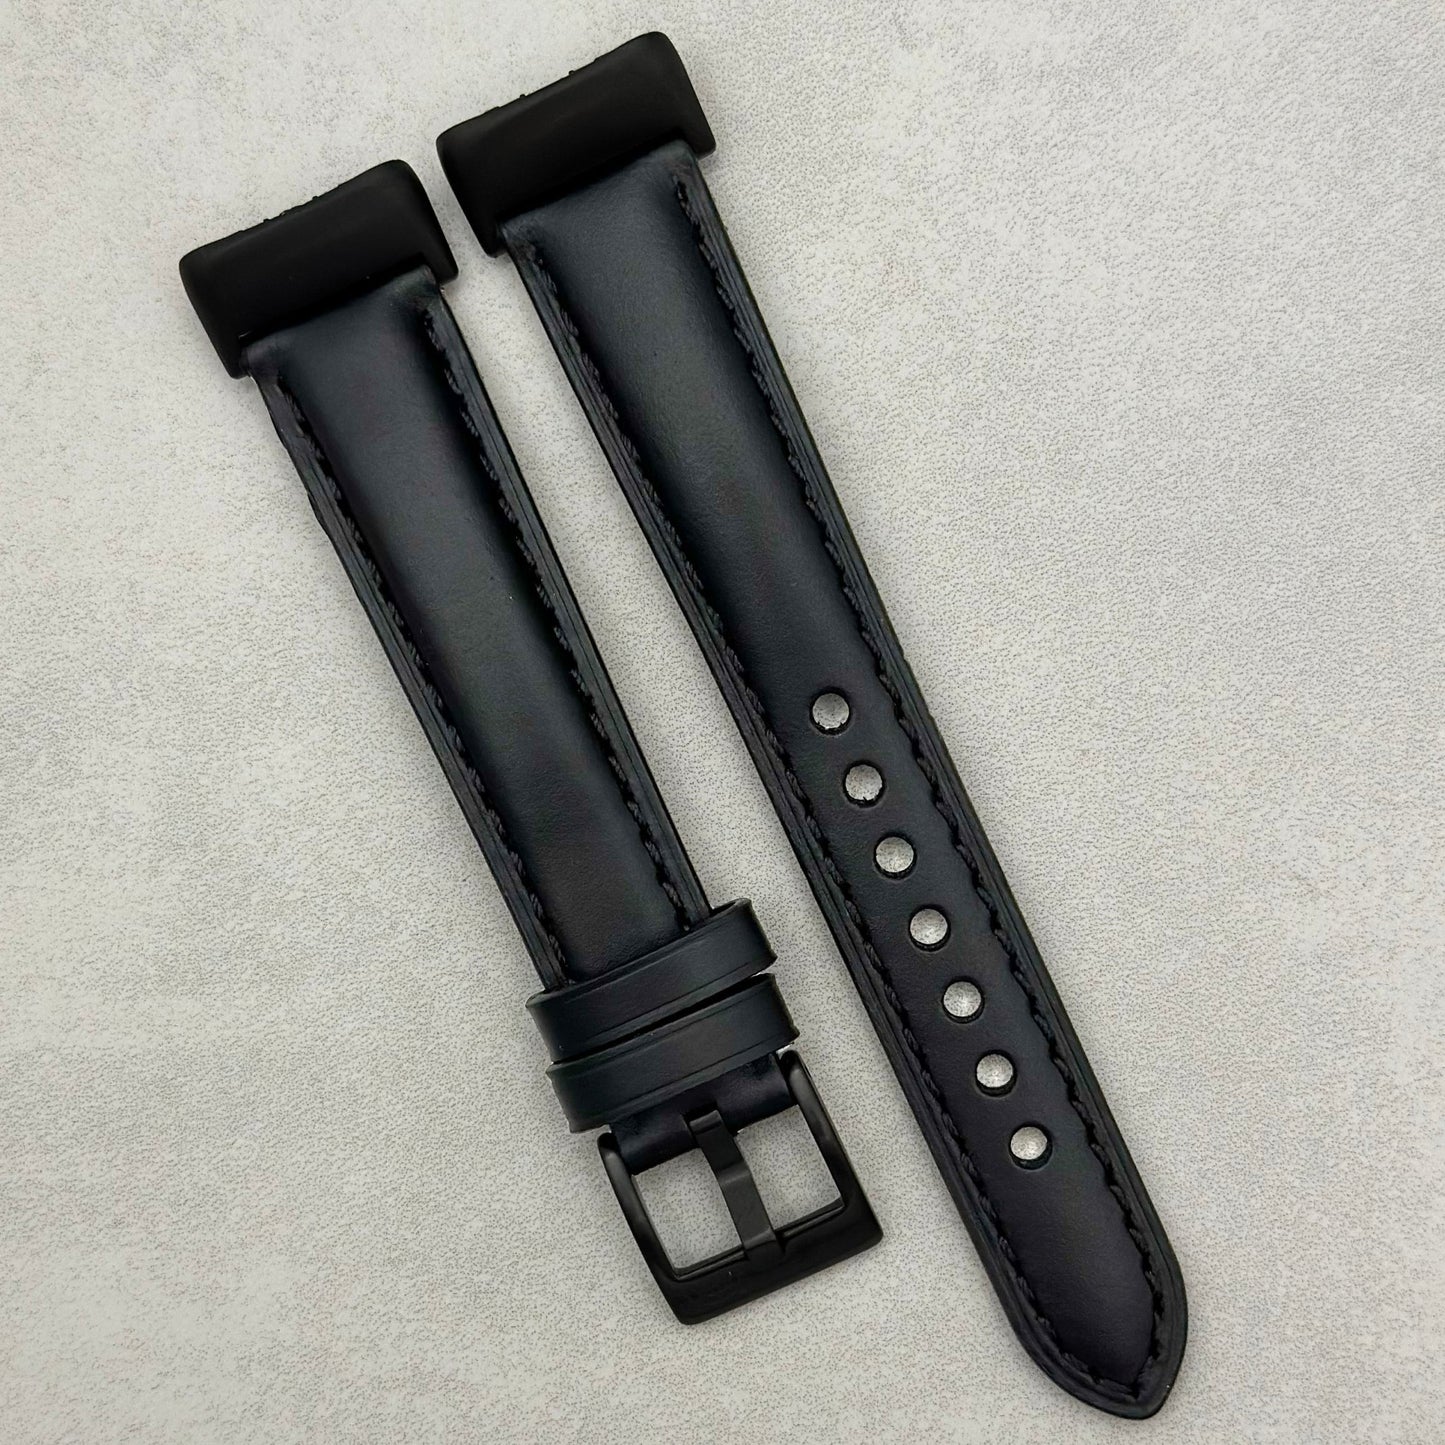 The Athens: Jet Black Full Grain Leather Fitbit Charge Watch Strap